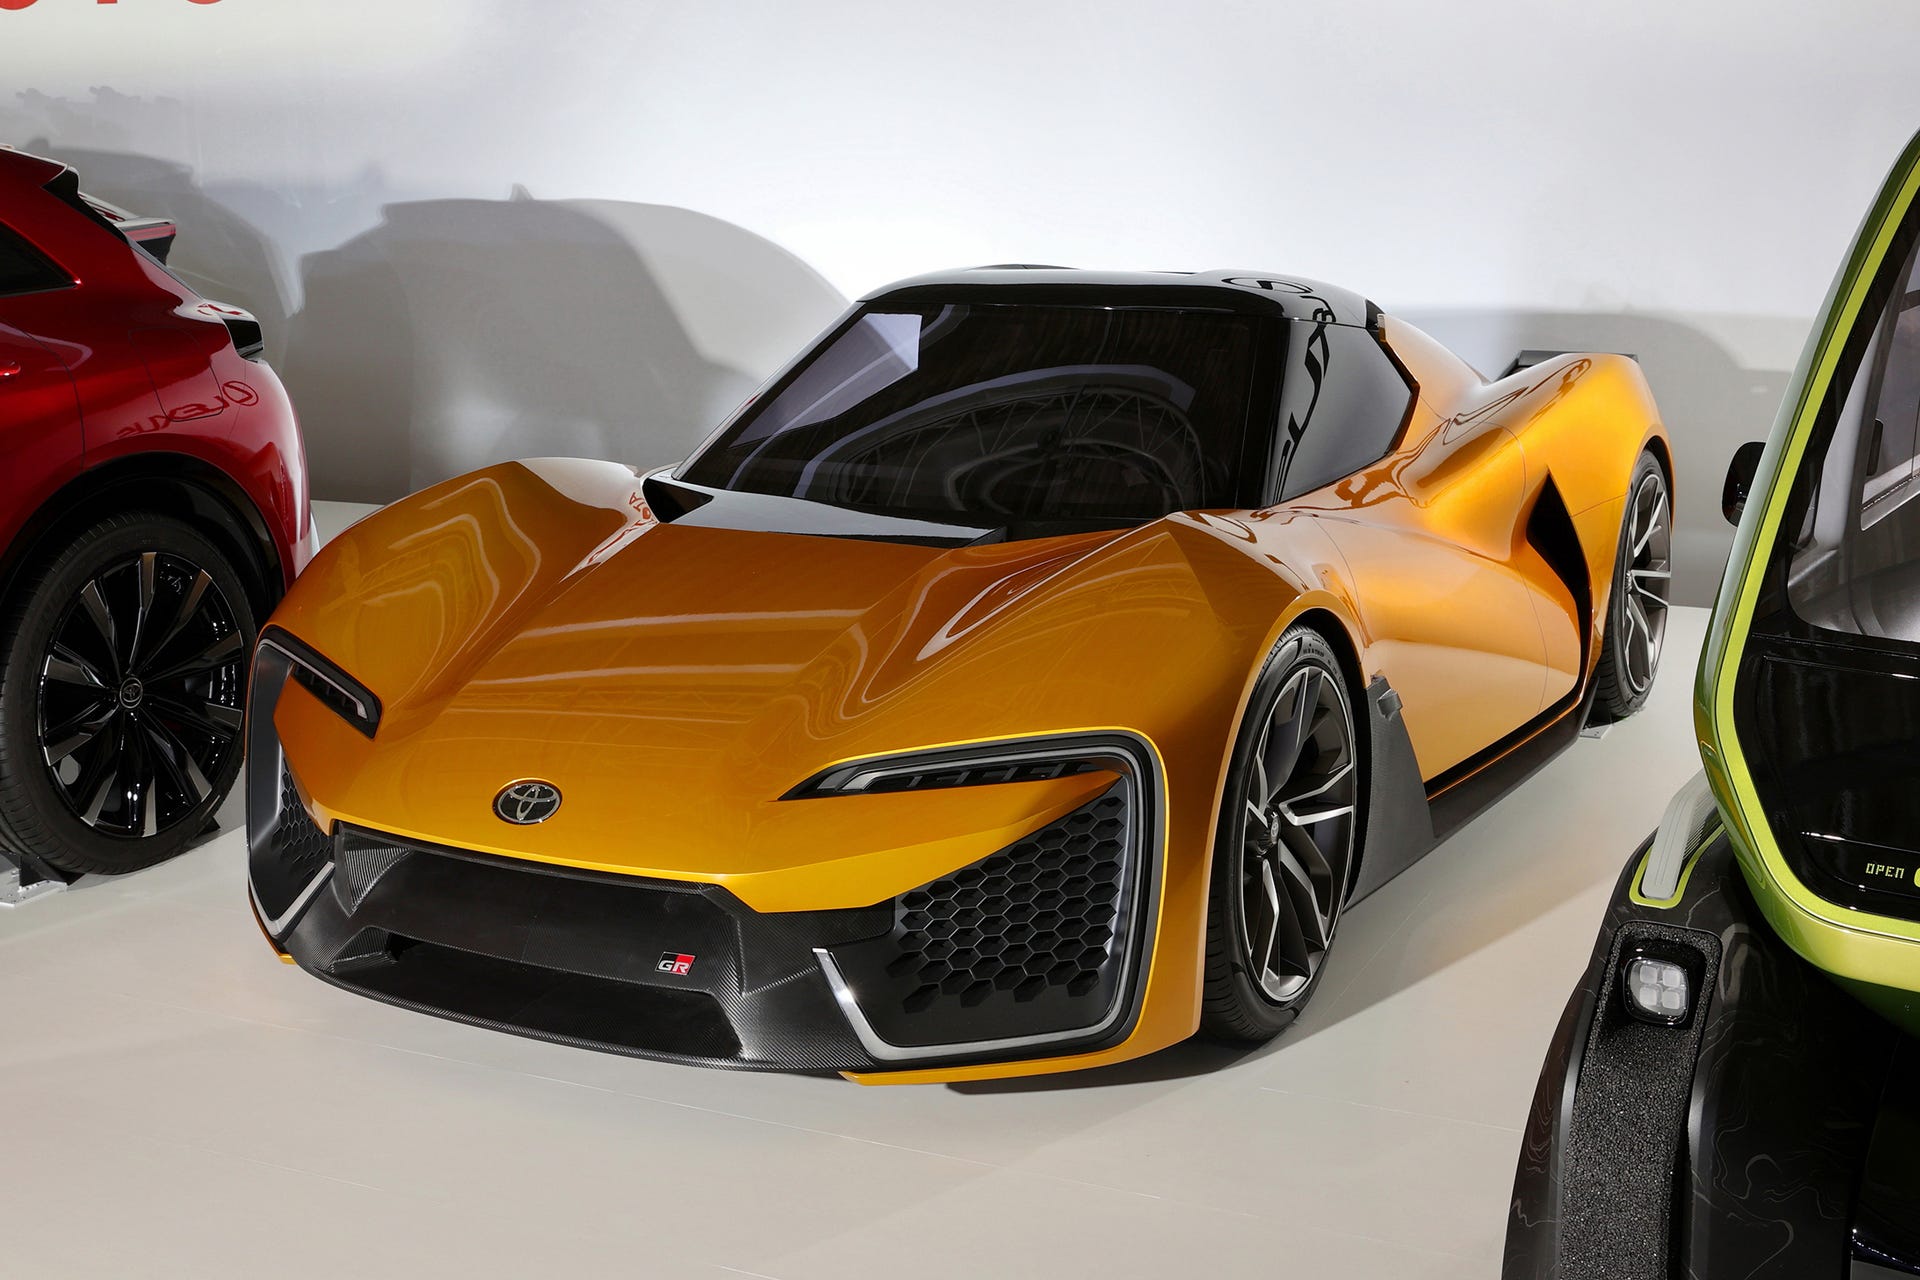 Toyota teases slick electric sports cars in major EV preview - CNET